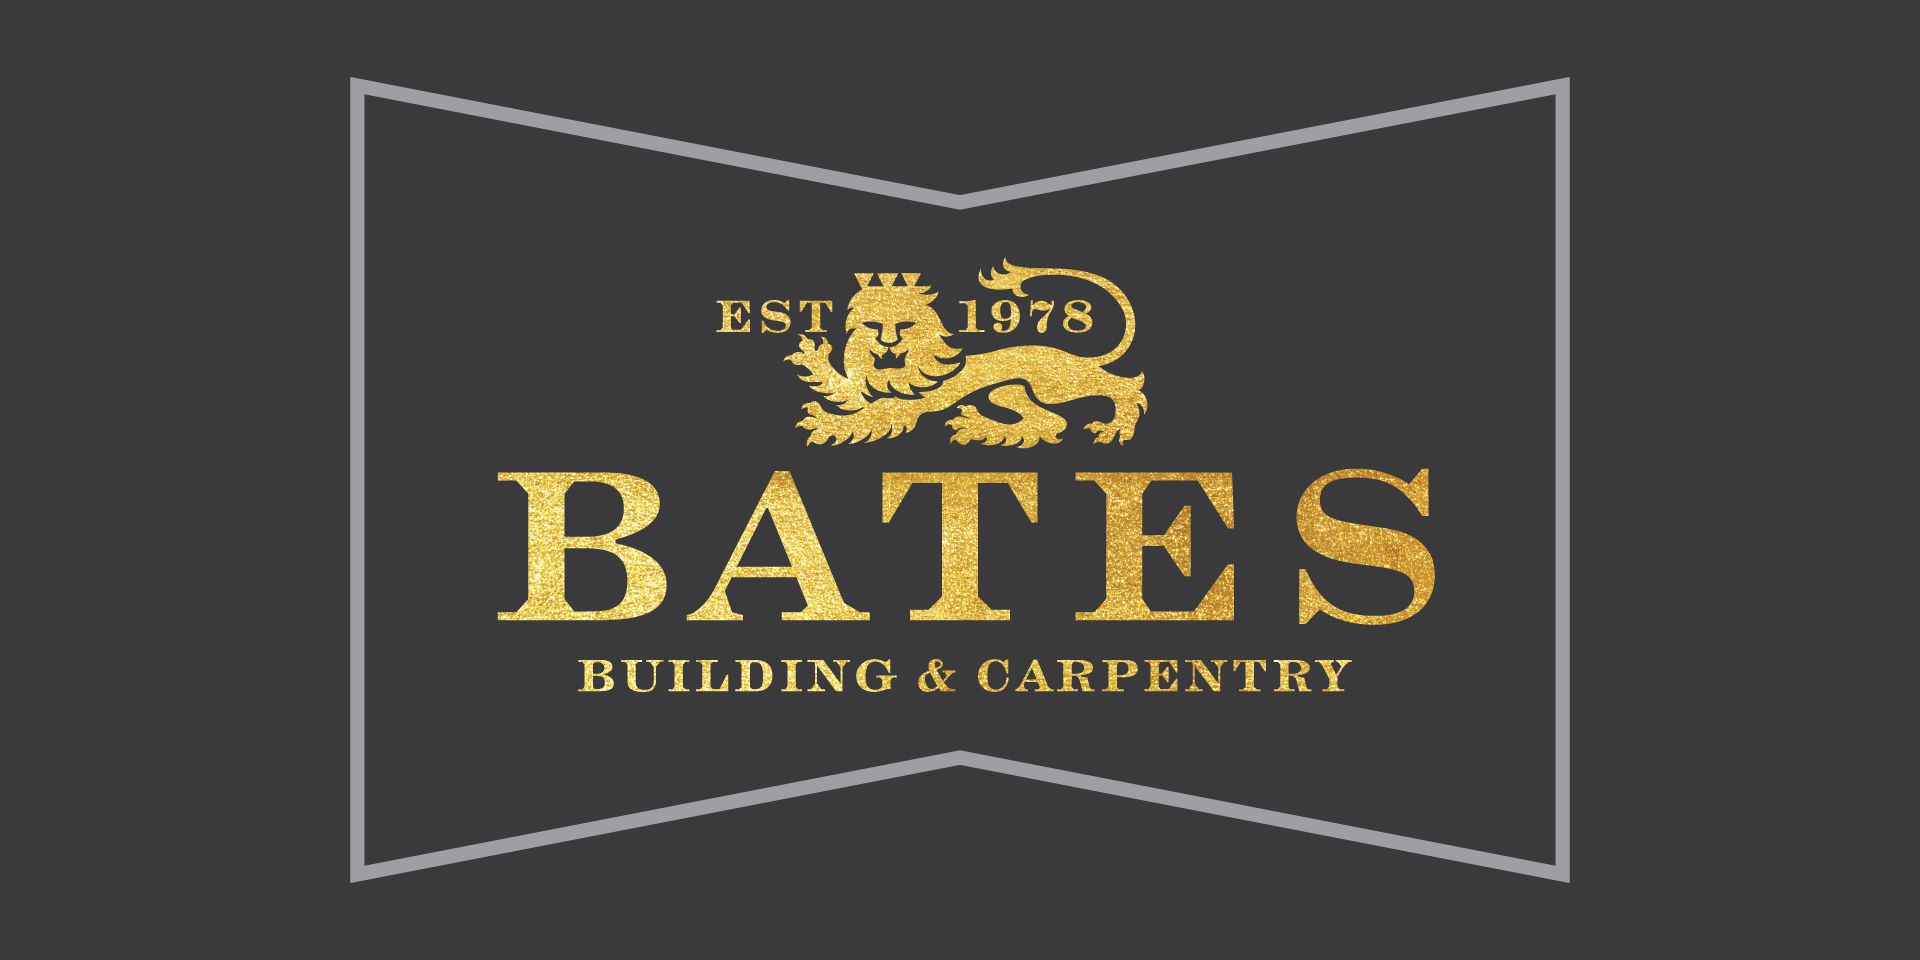 Bates Building and Carpentry since 1978 Brand identity logo